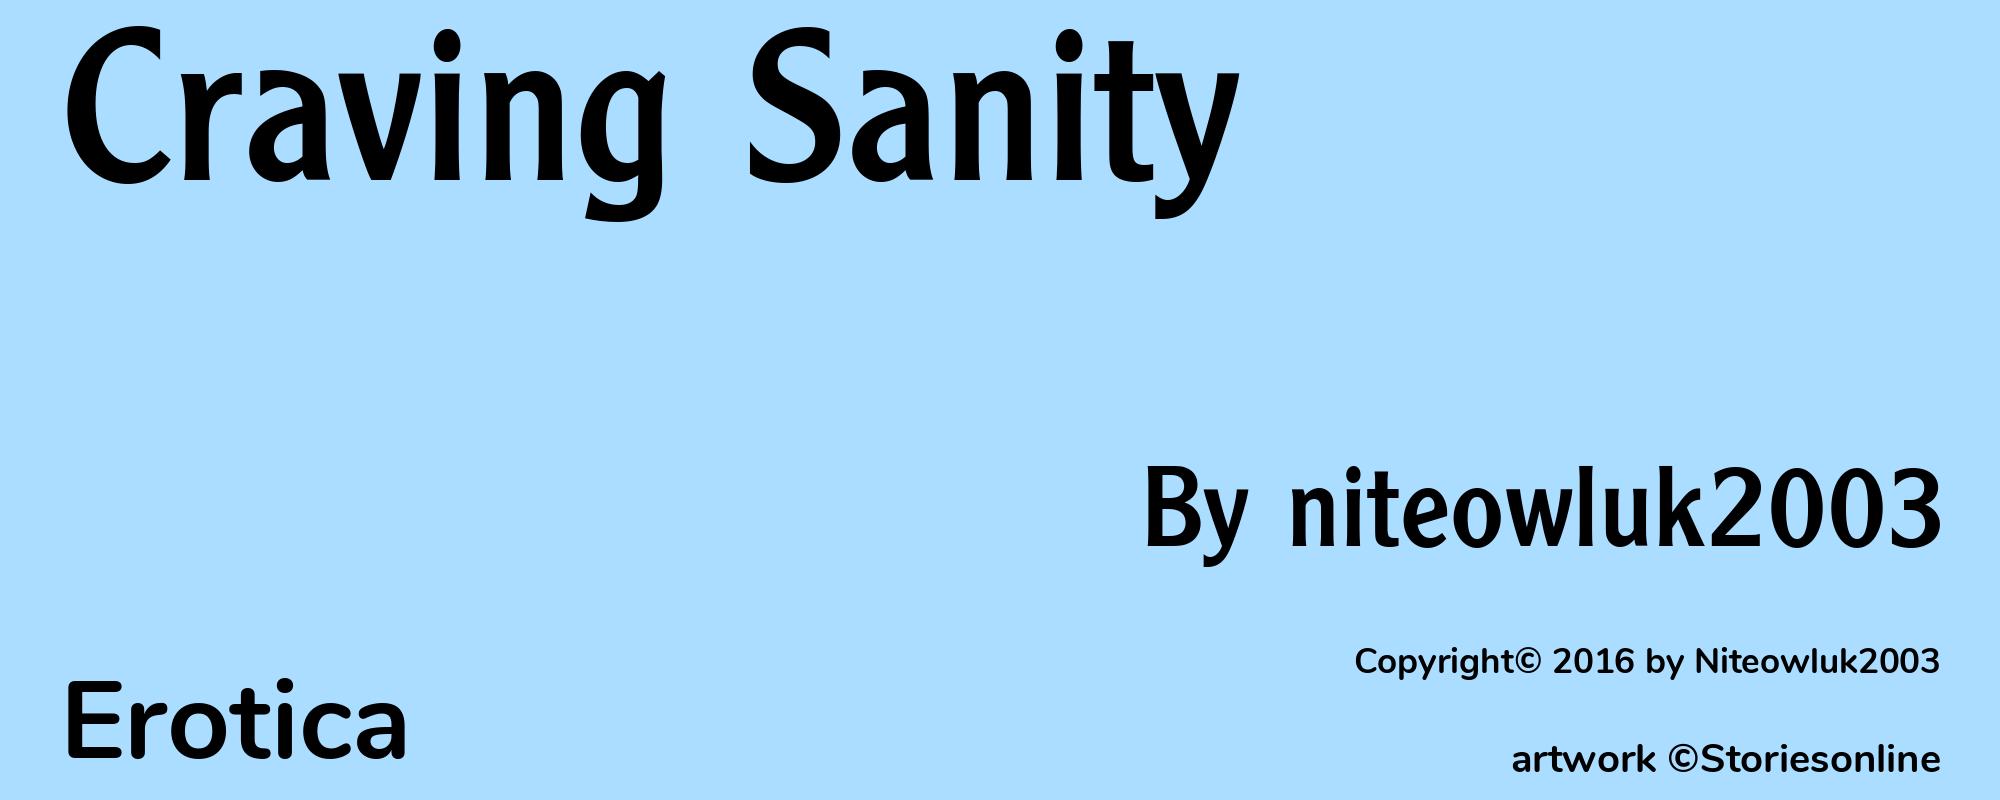 Craving Sanity - Cover